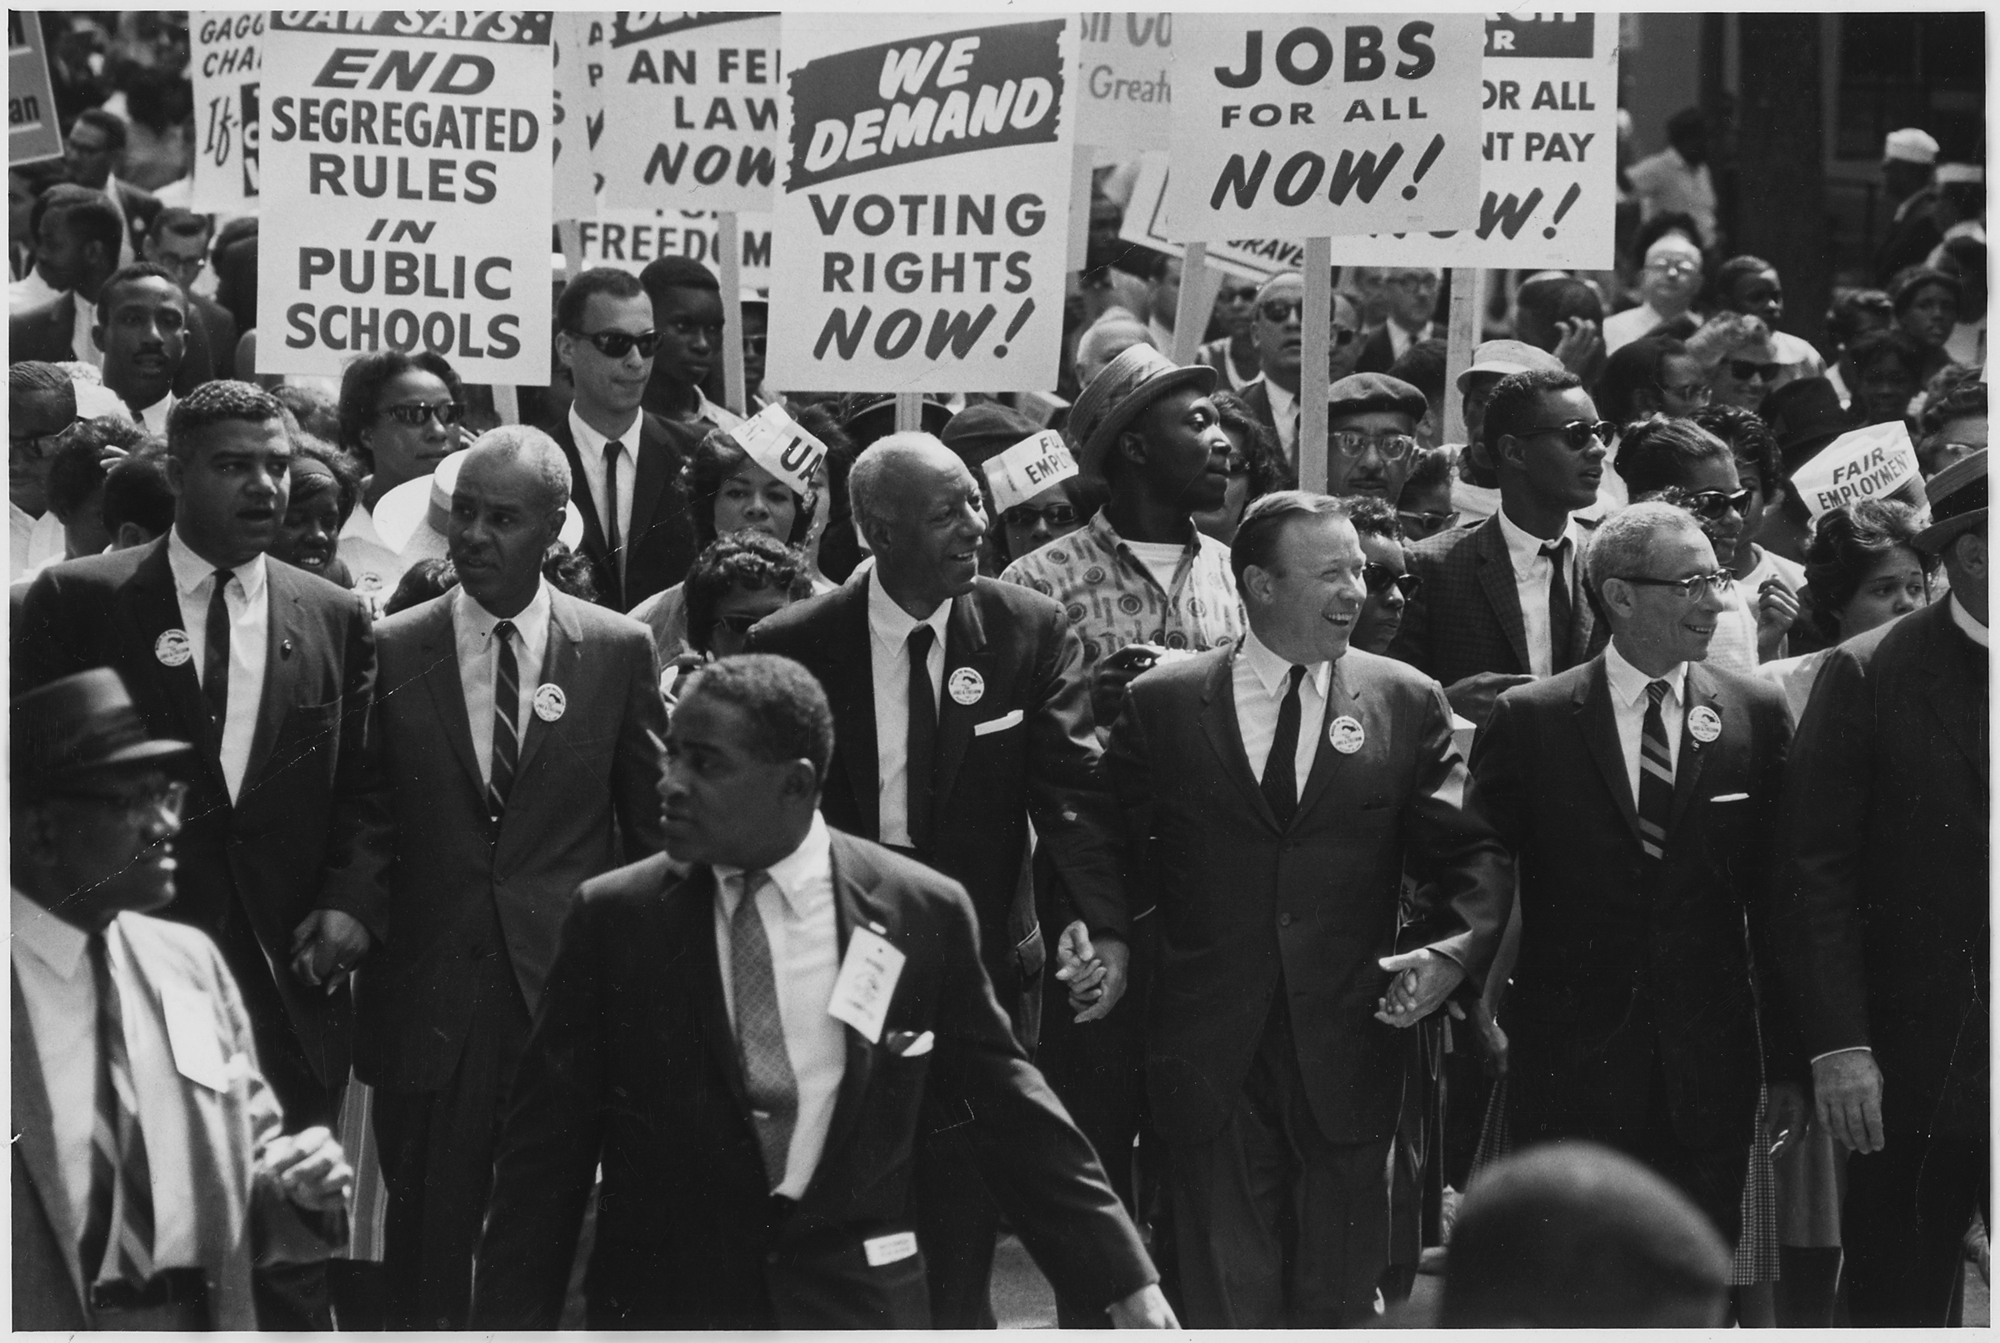 civil rights leaders march from the Washington Monument to the Lincoln Memorial, D.C. 1963